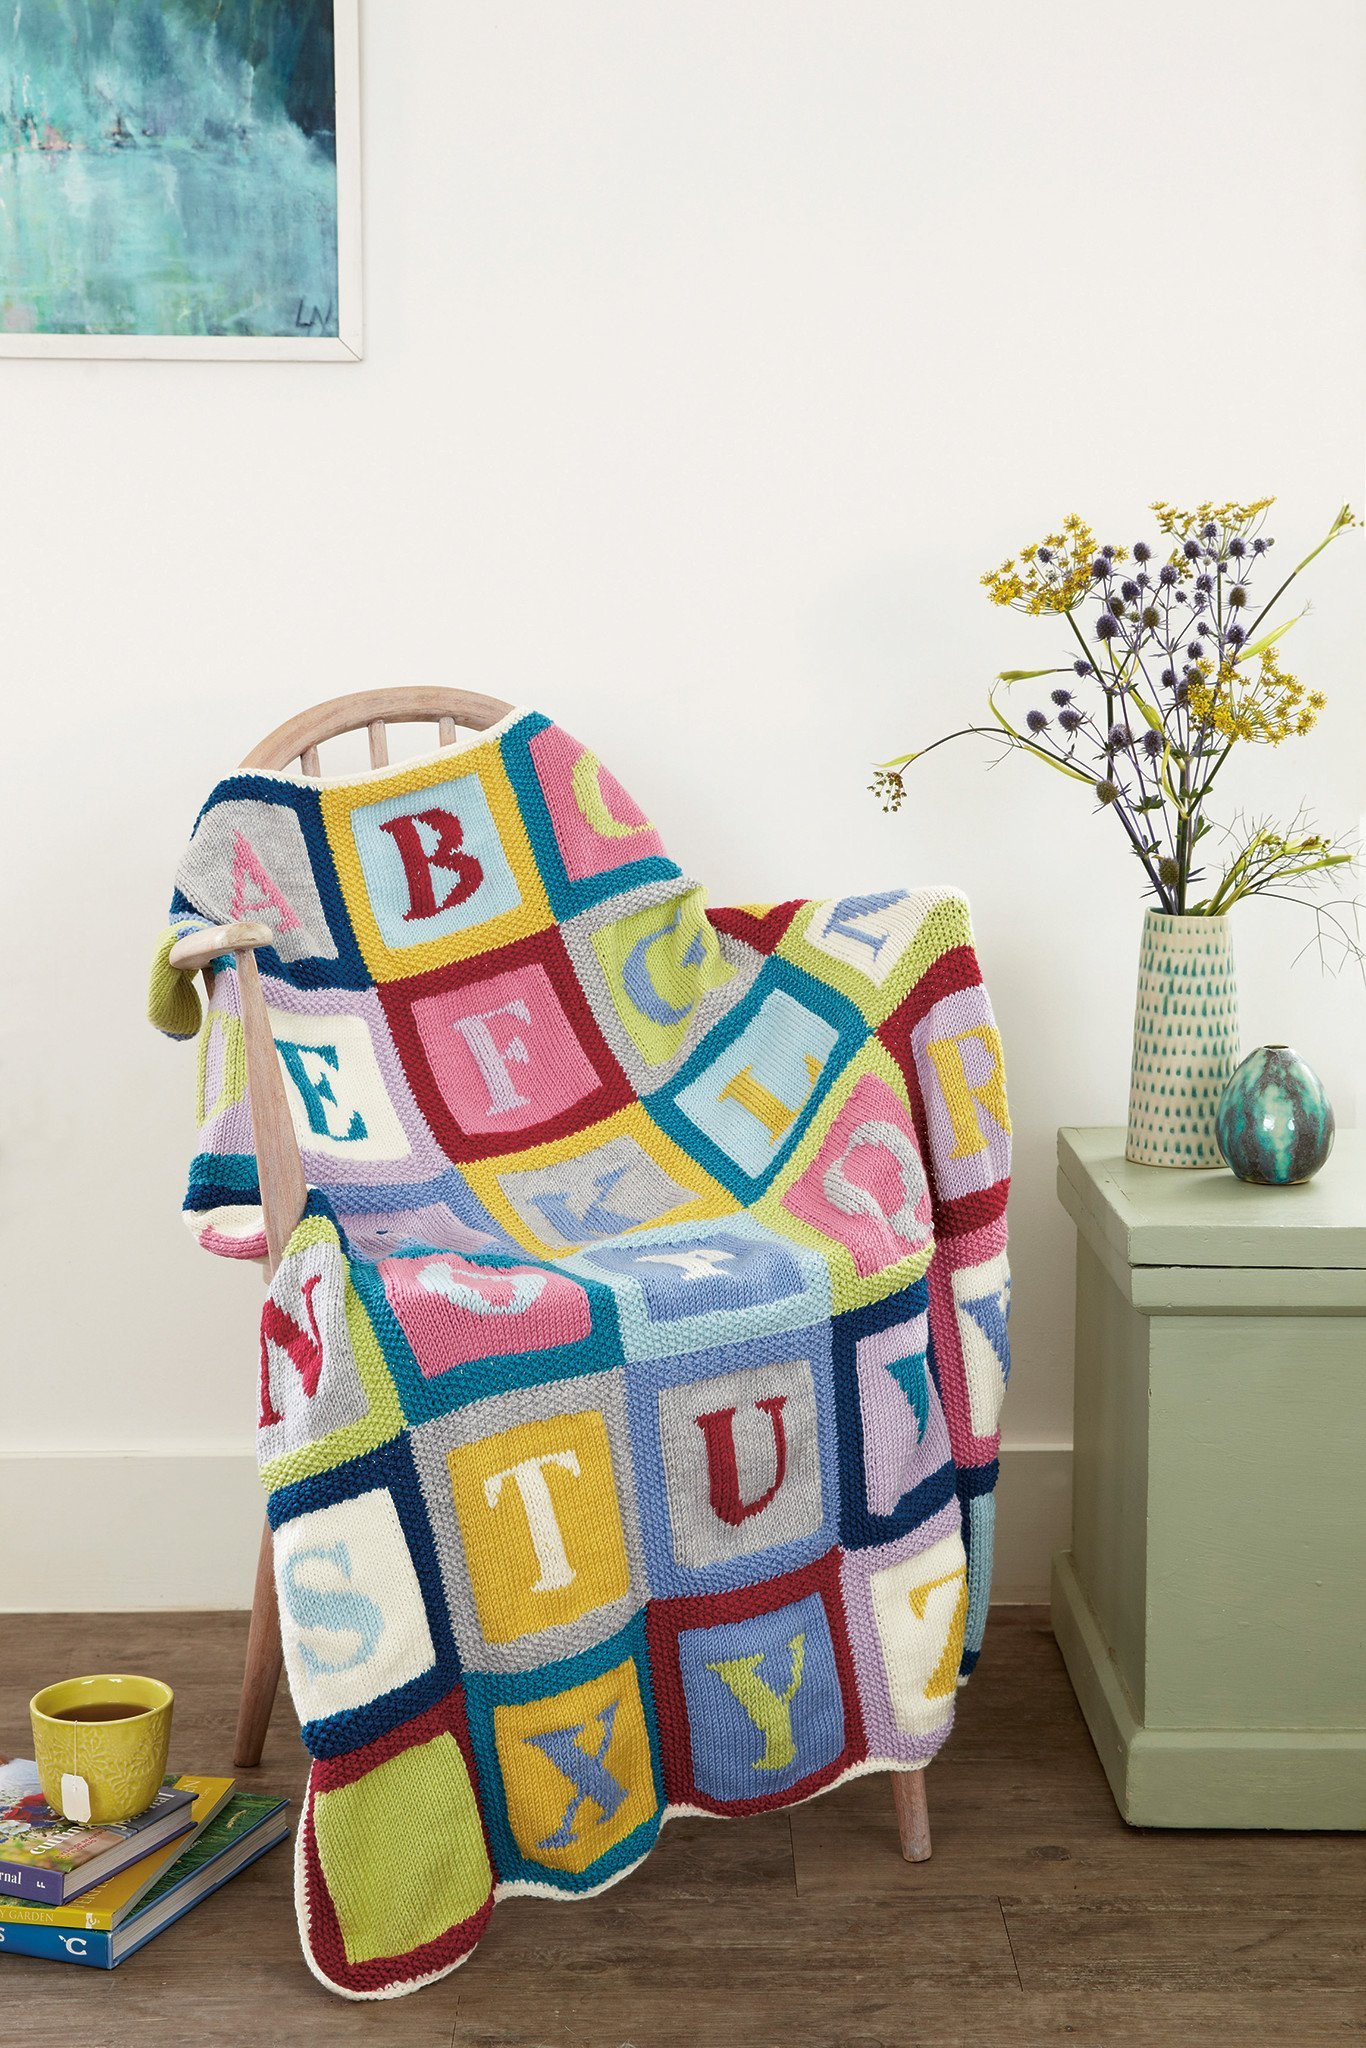 Patchwork Knitting Patterns For Blankets Alphabet Blanket Knitting Pattern